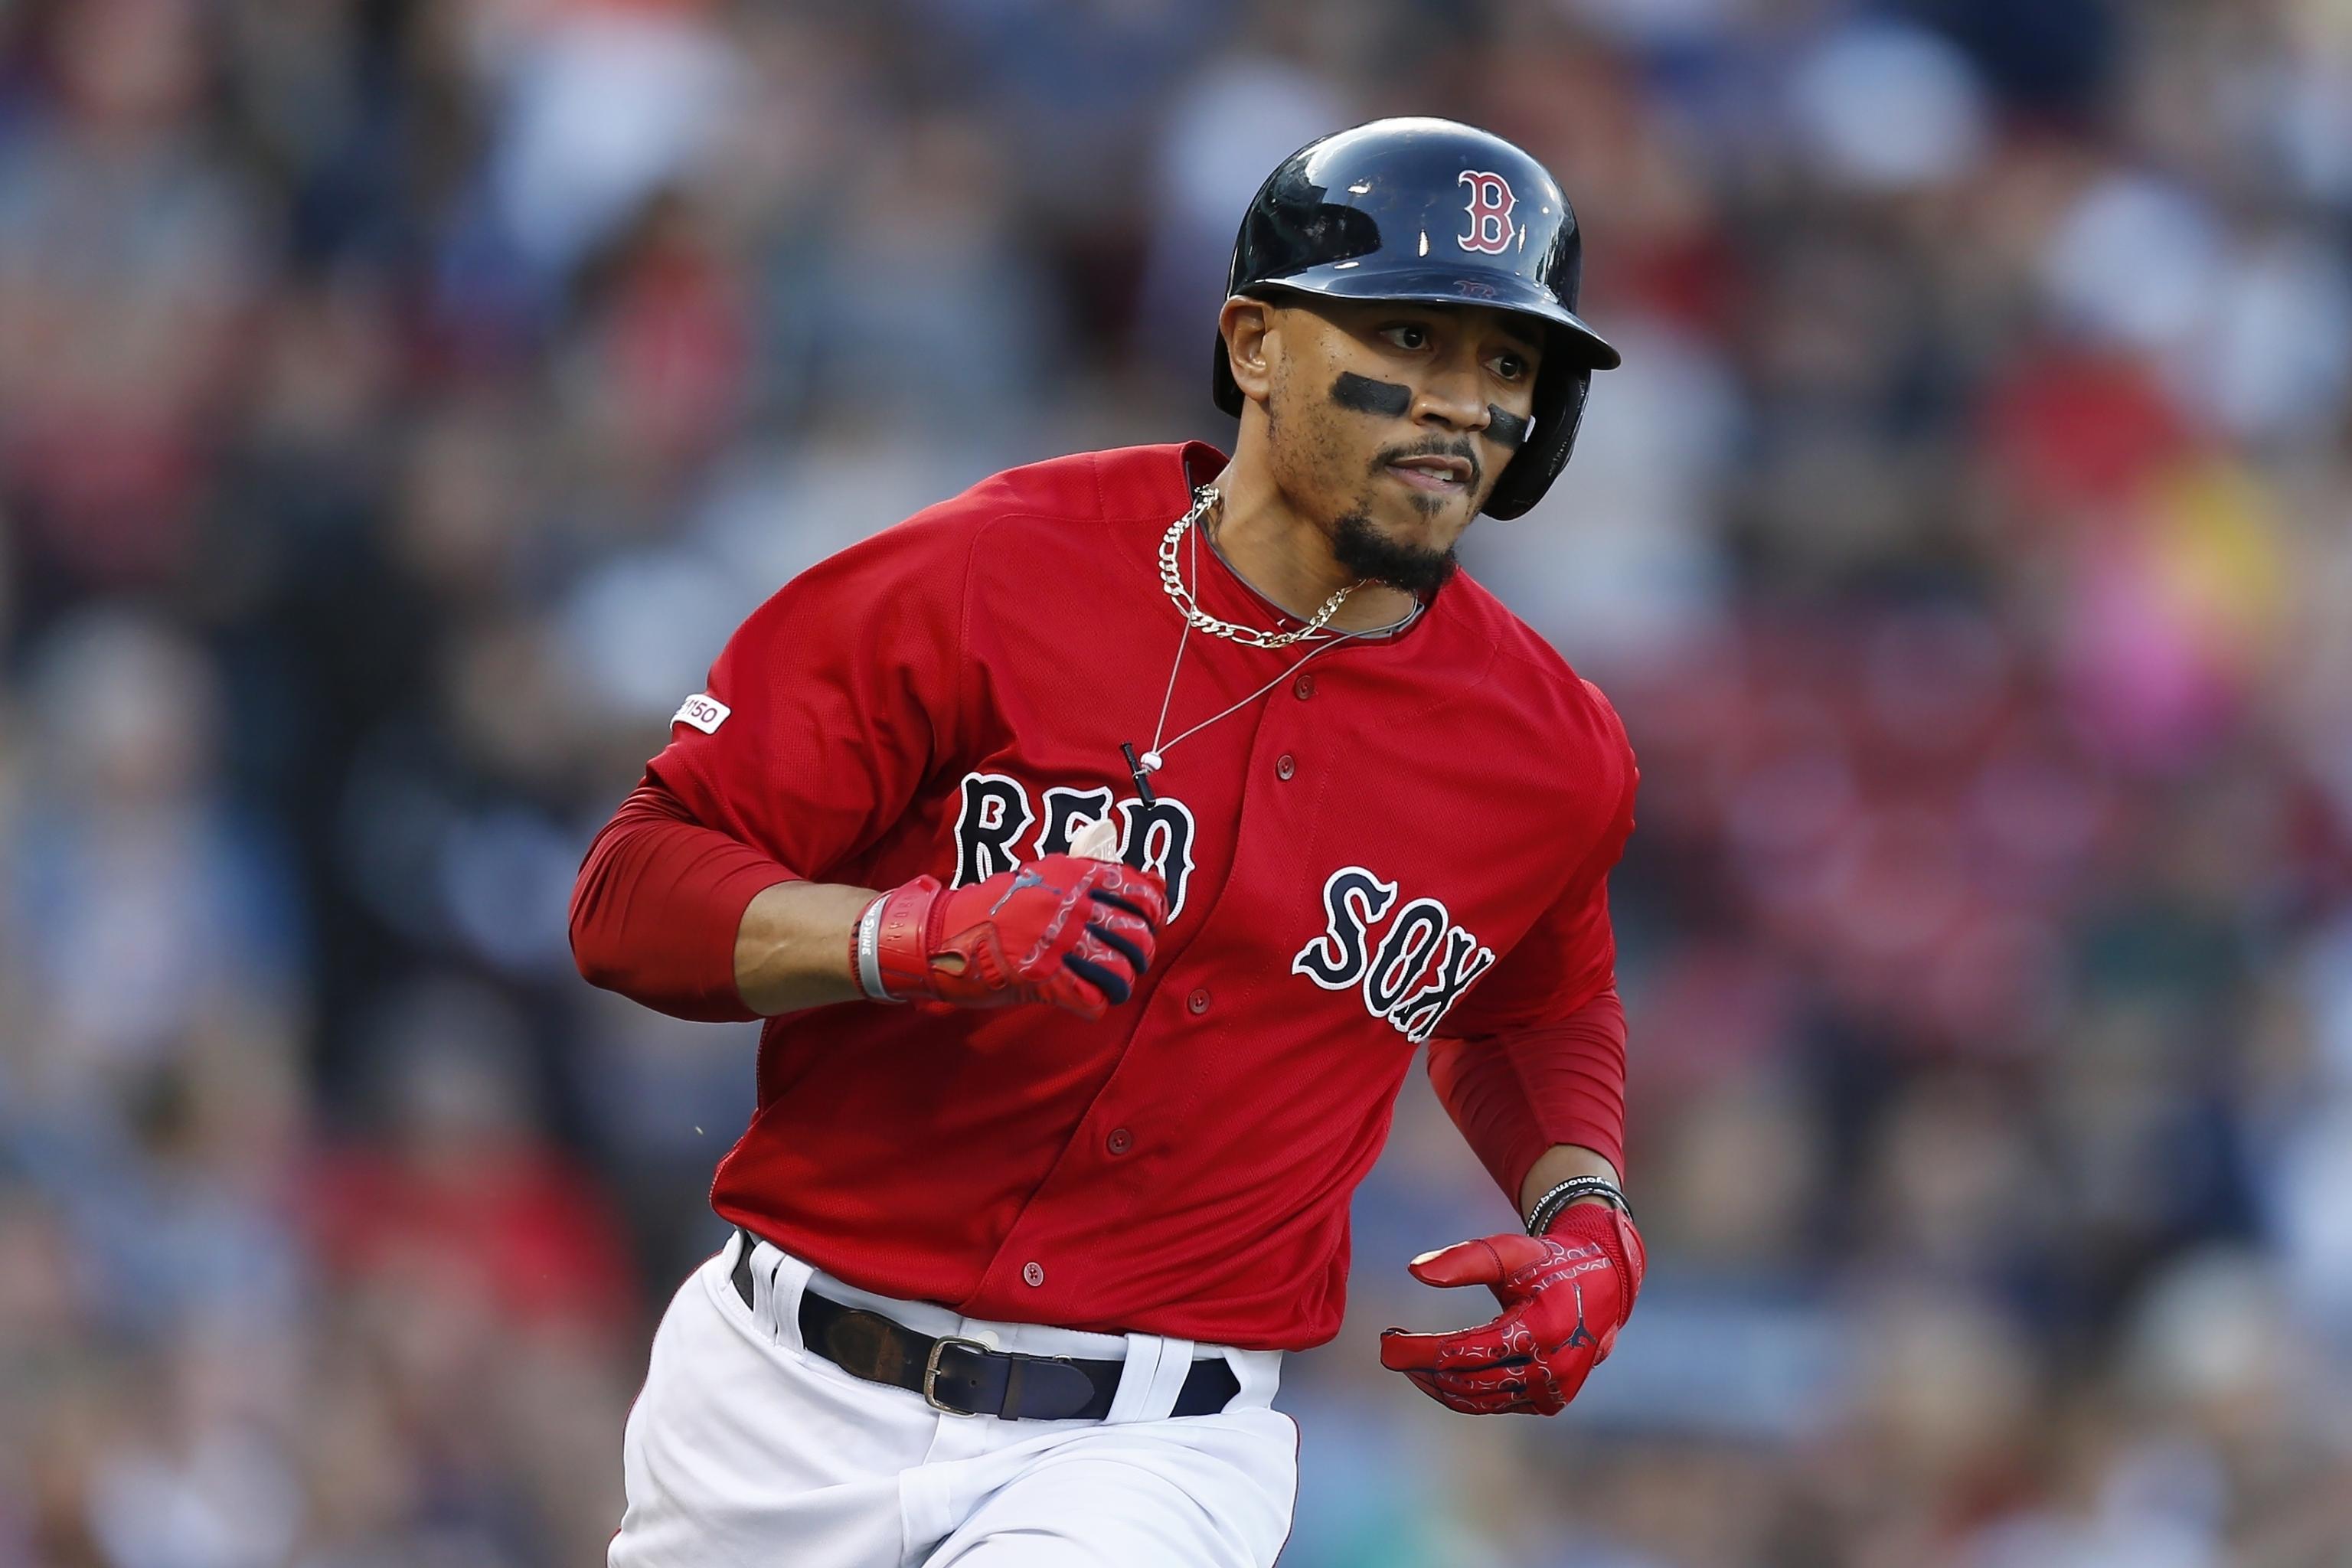 MLB Notes: Revisiting the Mookie Betts trade, and all its ramifications